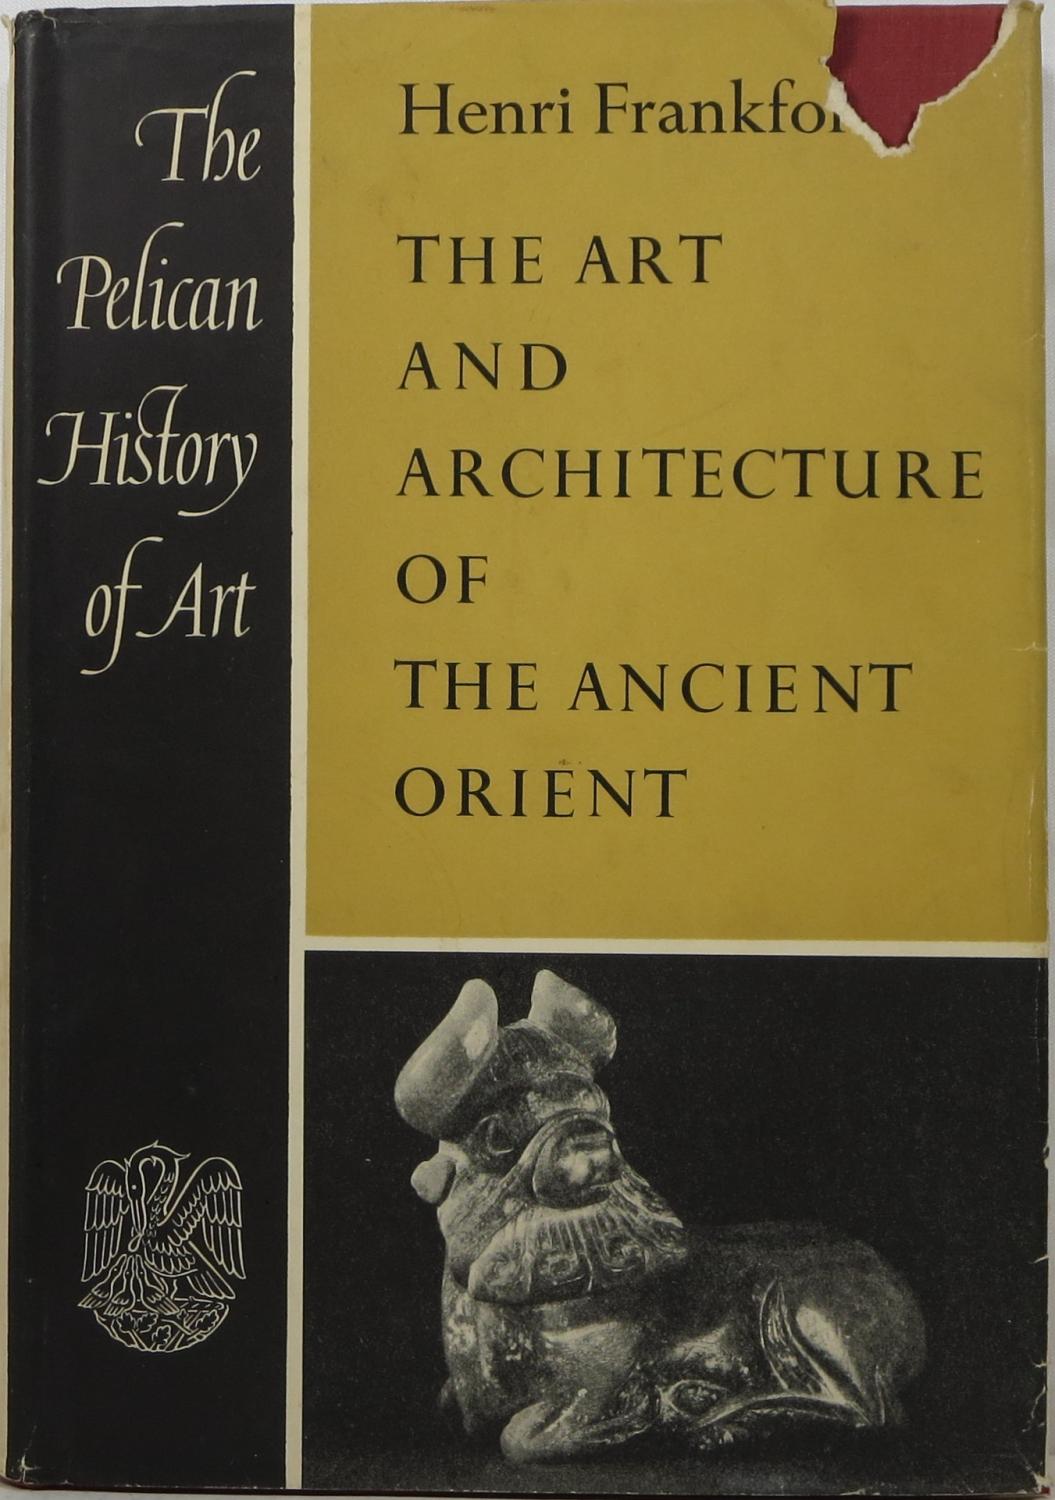 The Art and Architecture of the Ancient Orient by Frankfort, Henri